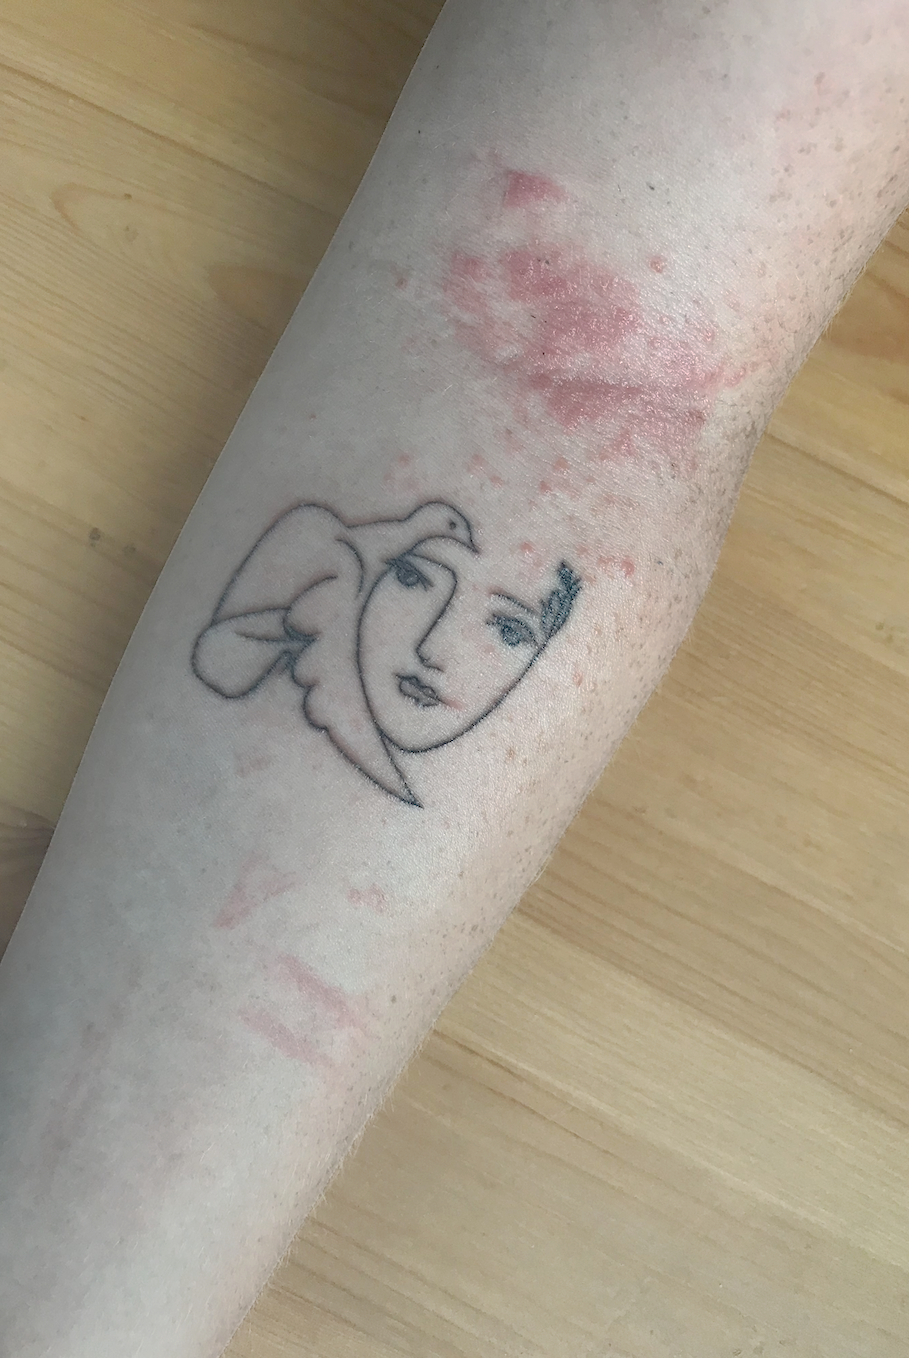 Tattoo Rash? Signs You Might Have an Allergic Reaction